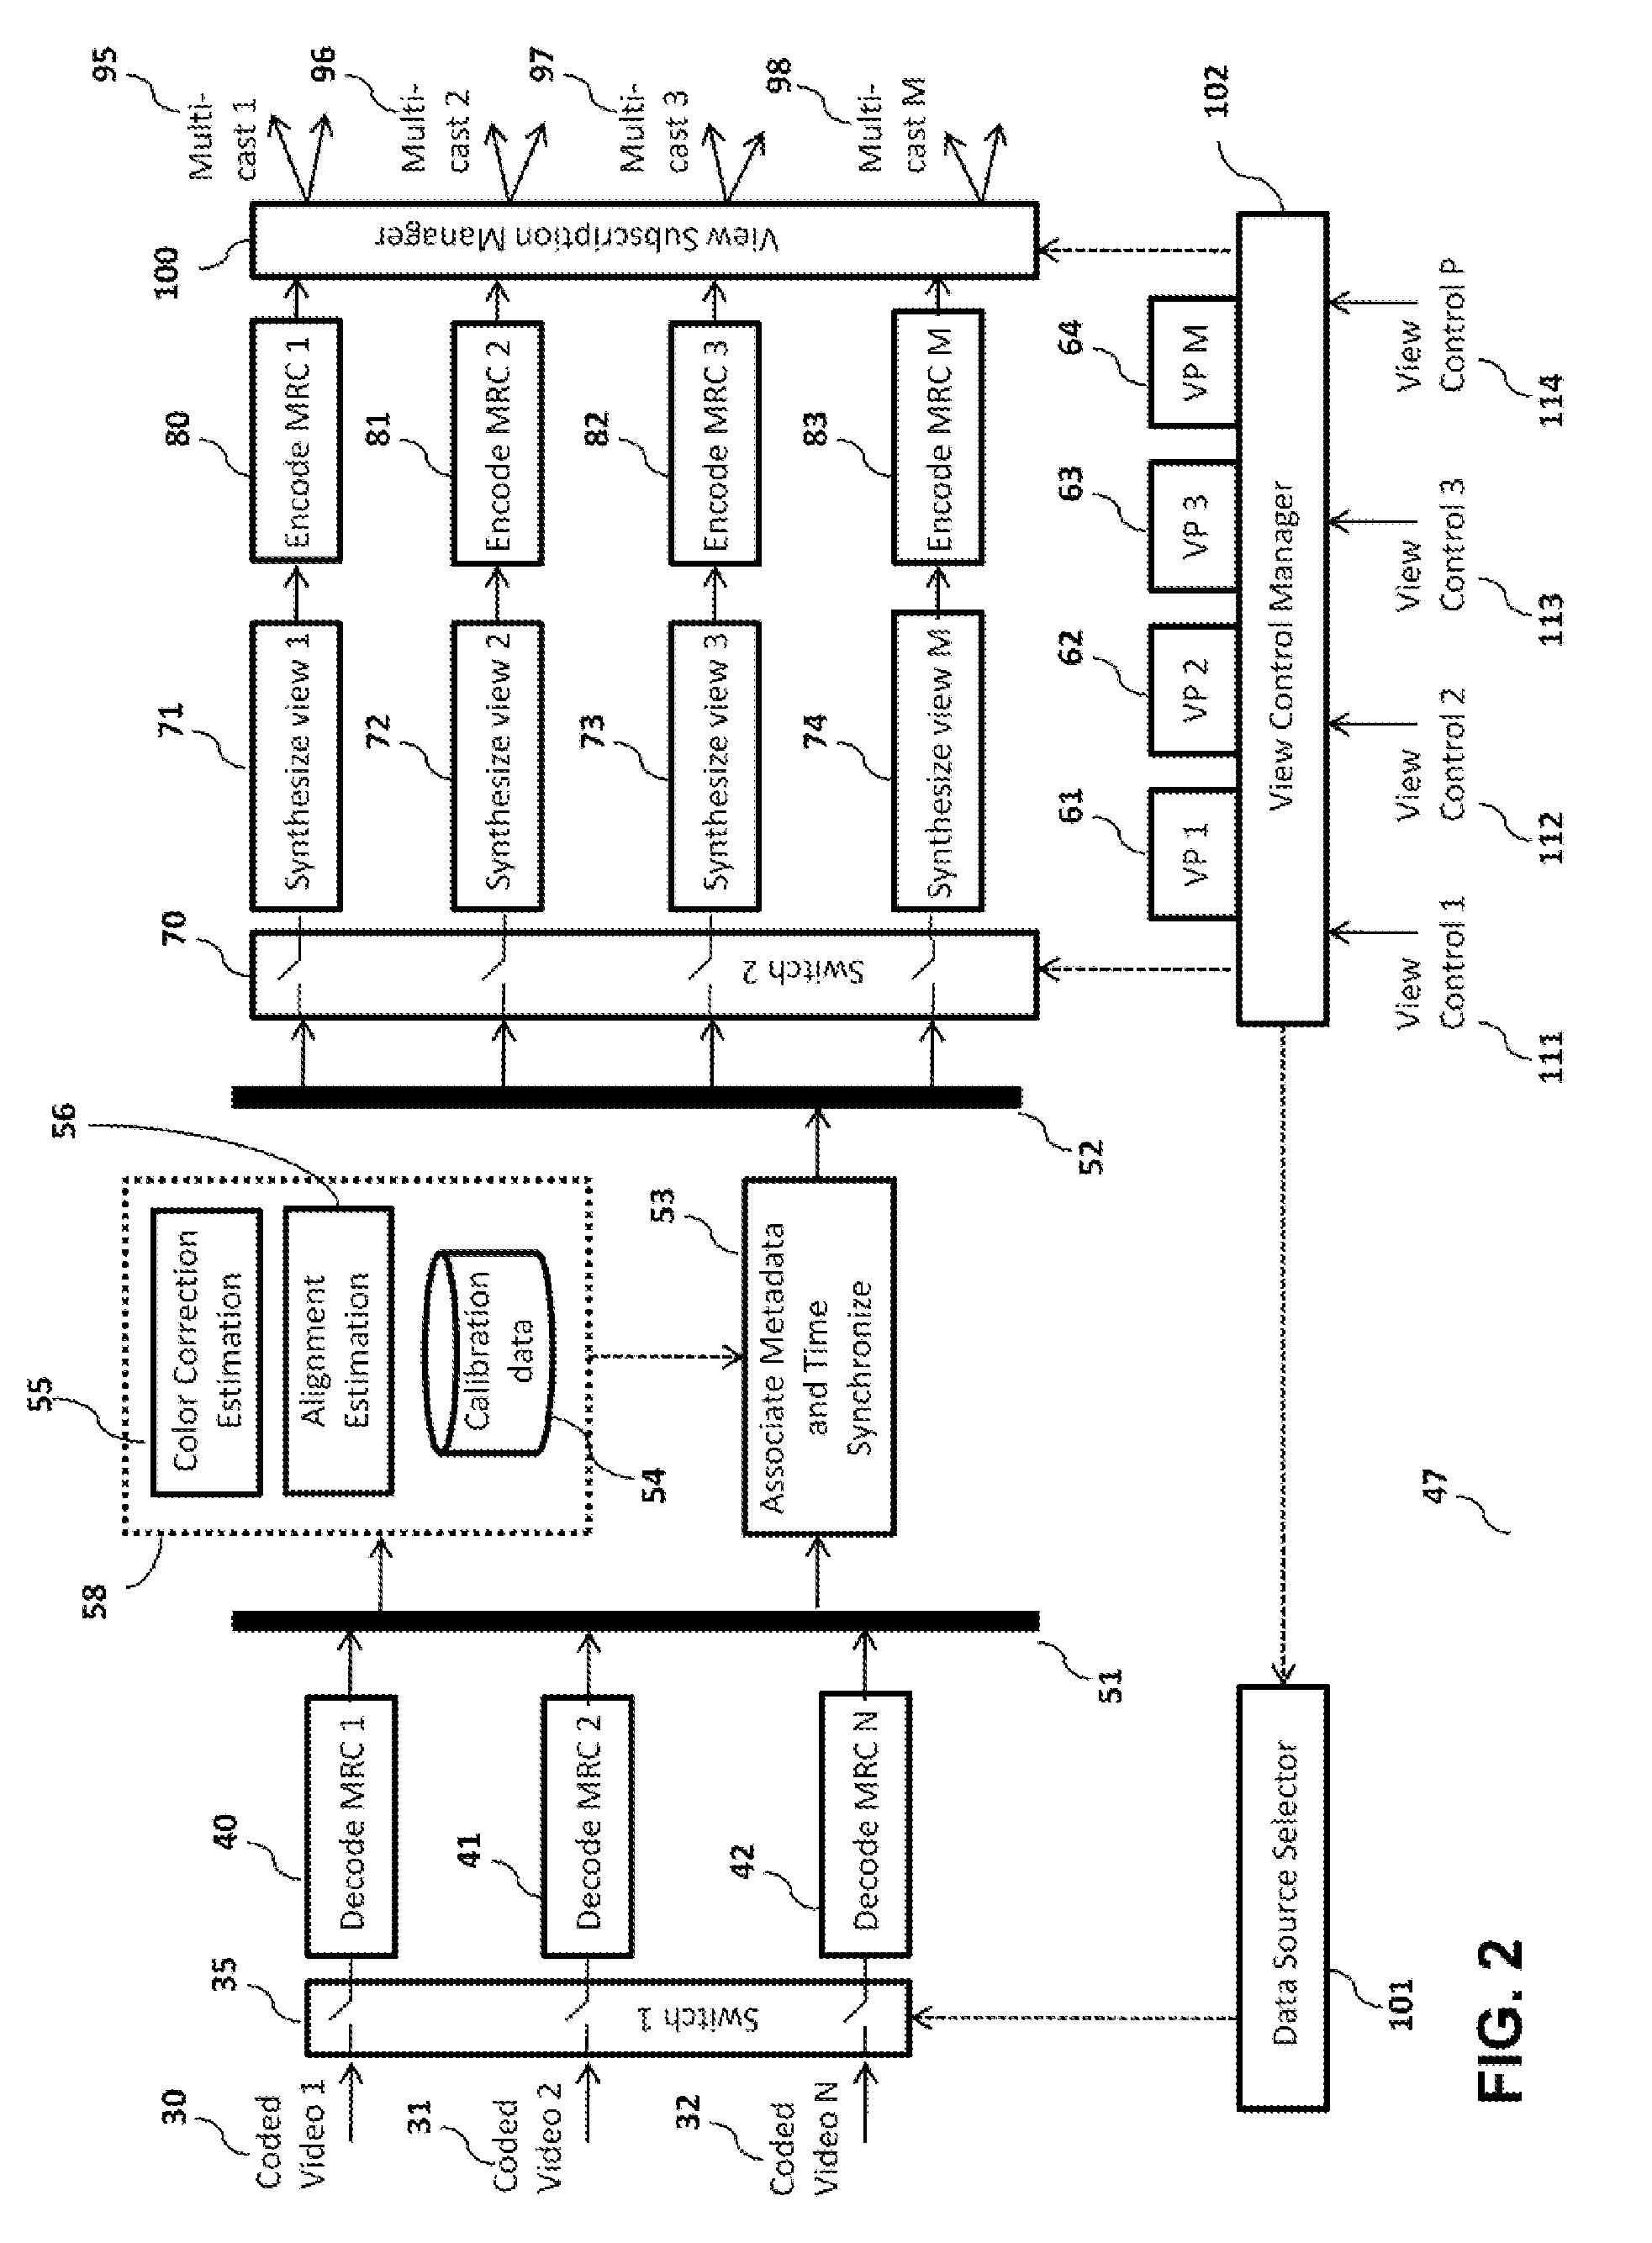 Method and system for scalable multi-user interactive visualization